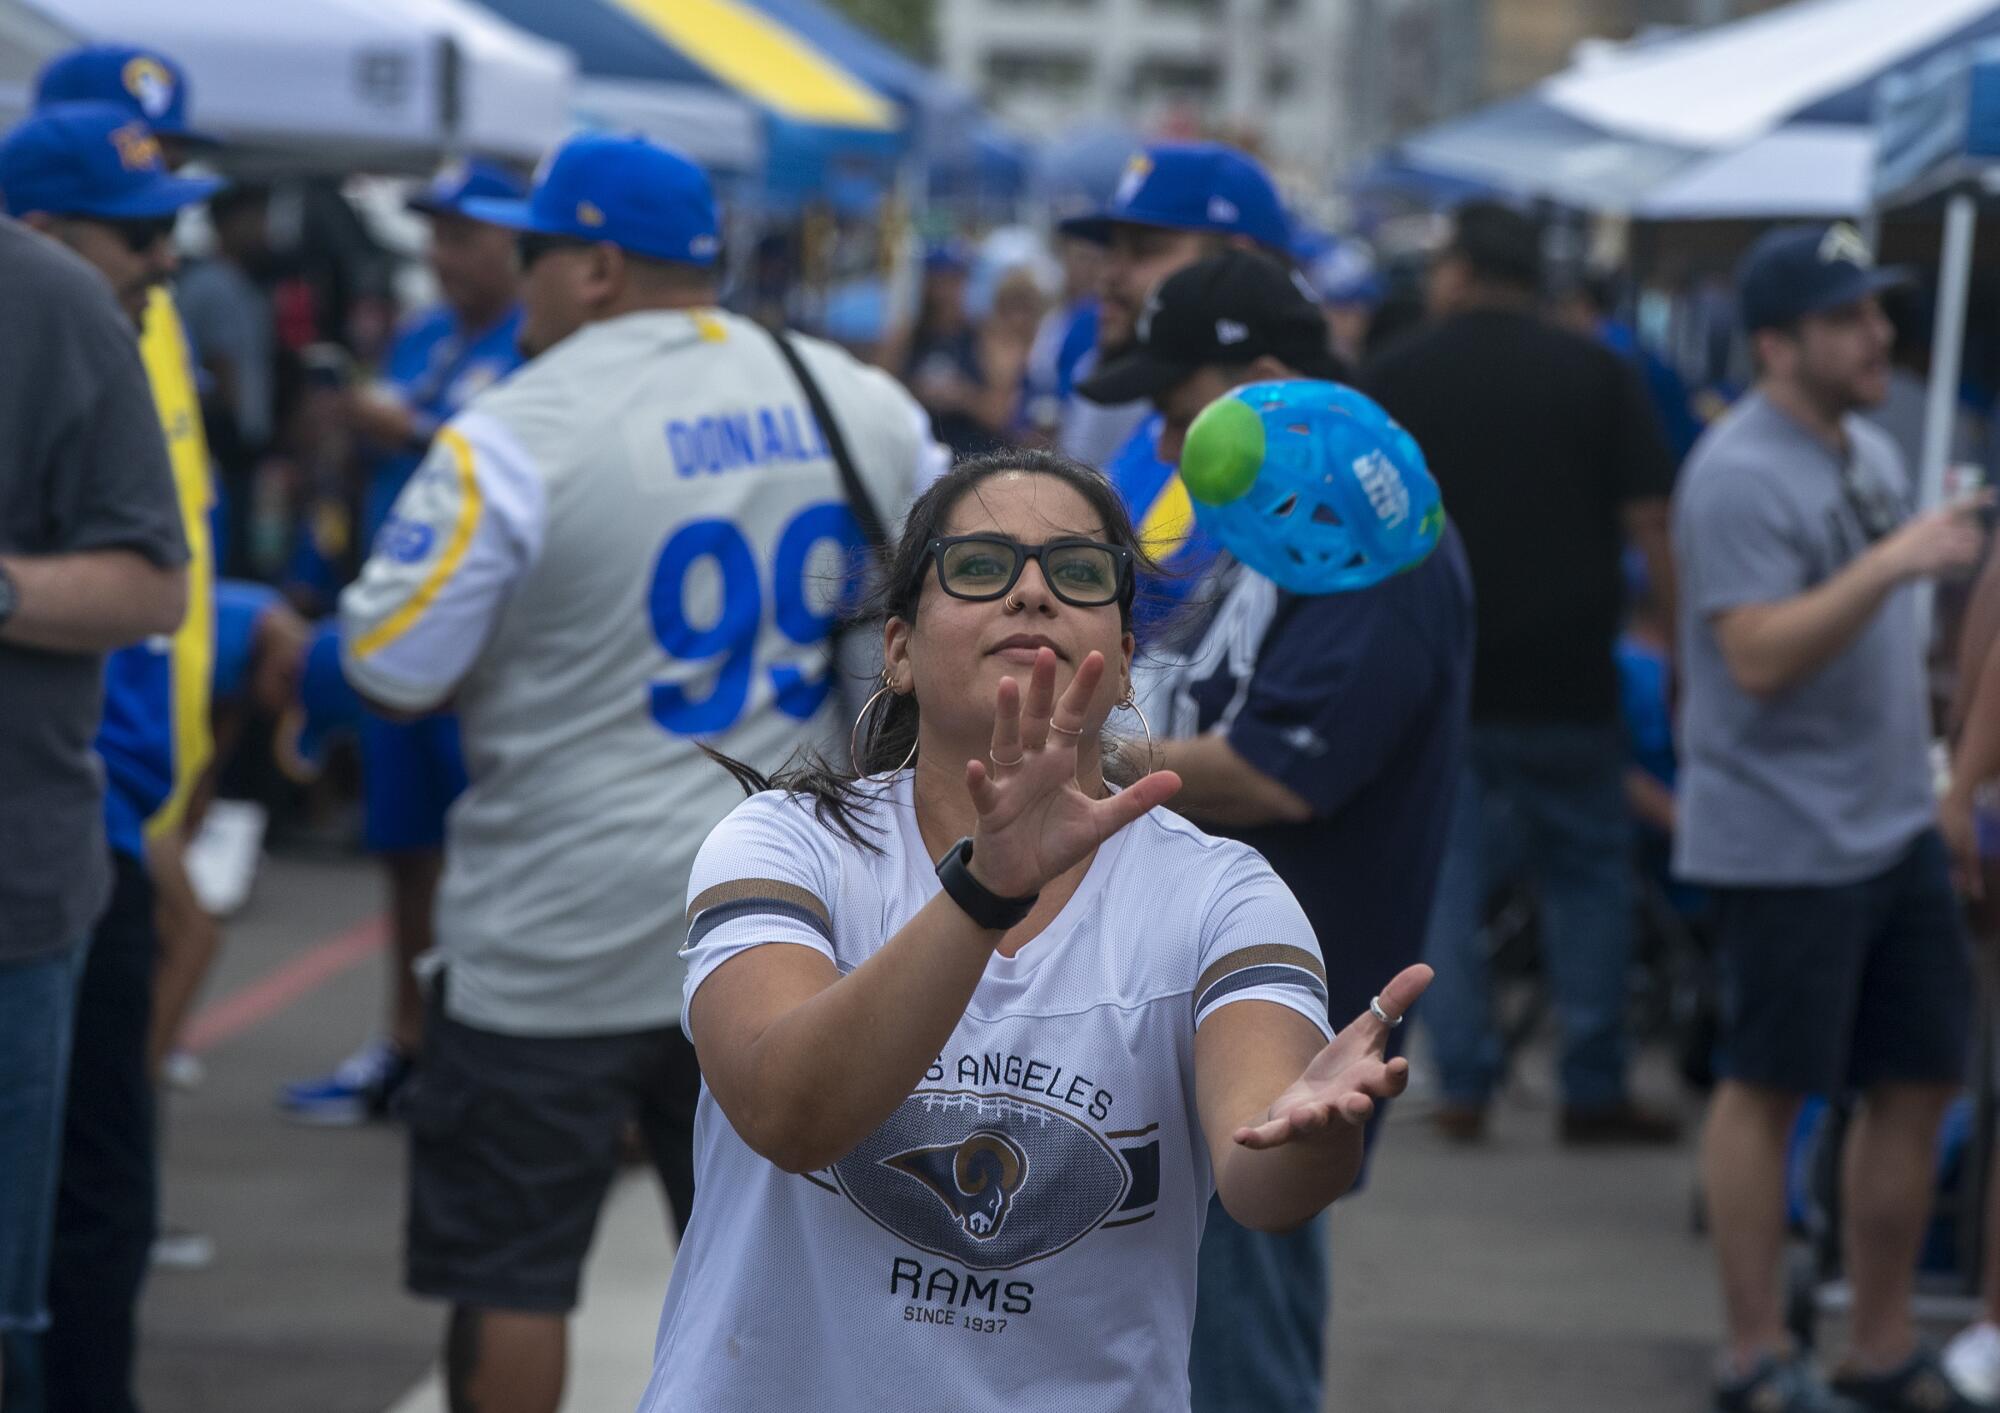 Rams, Chargers fans are 'blown away' by SoFi Stadium - Los Angeles Times